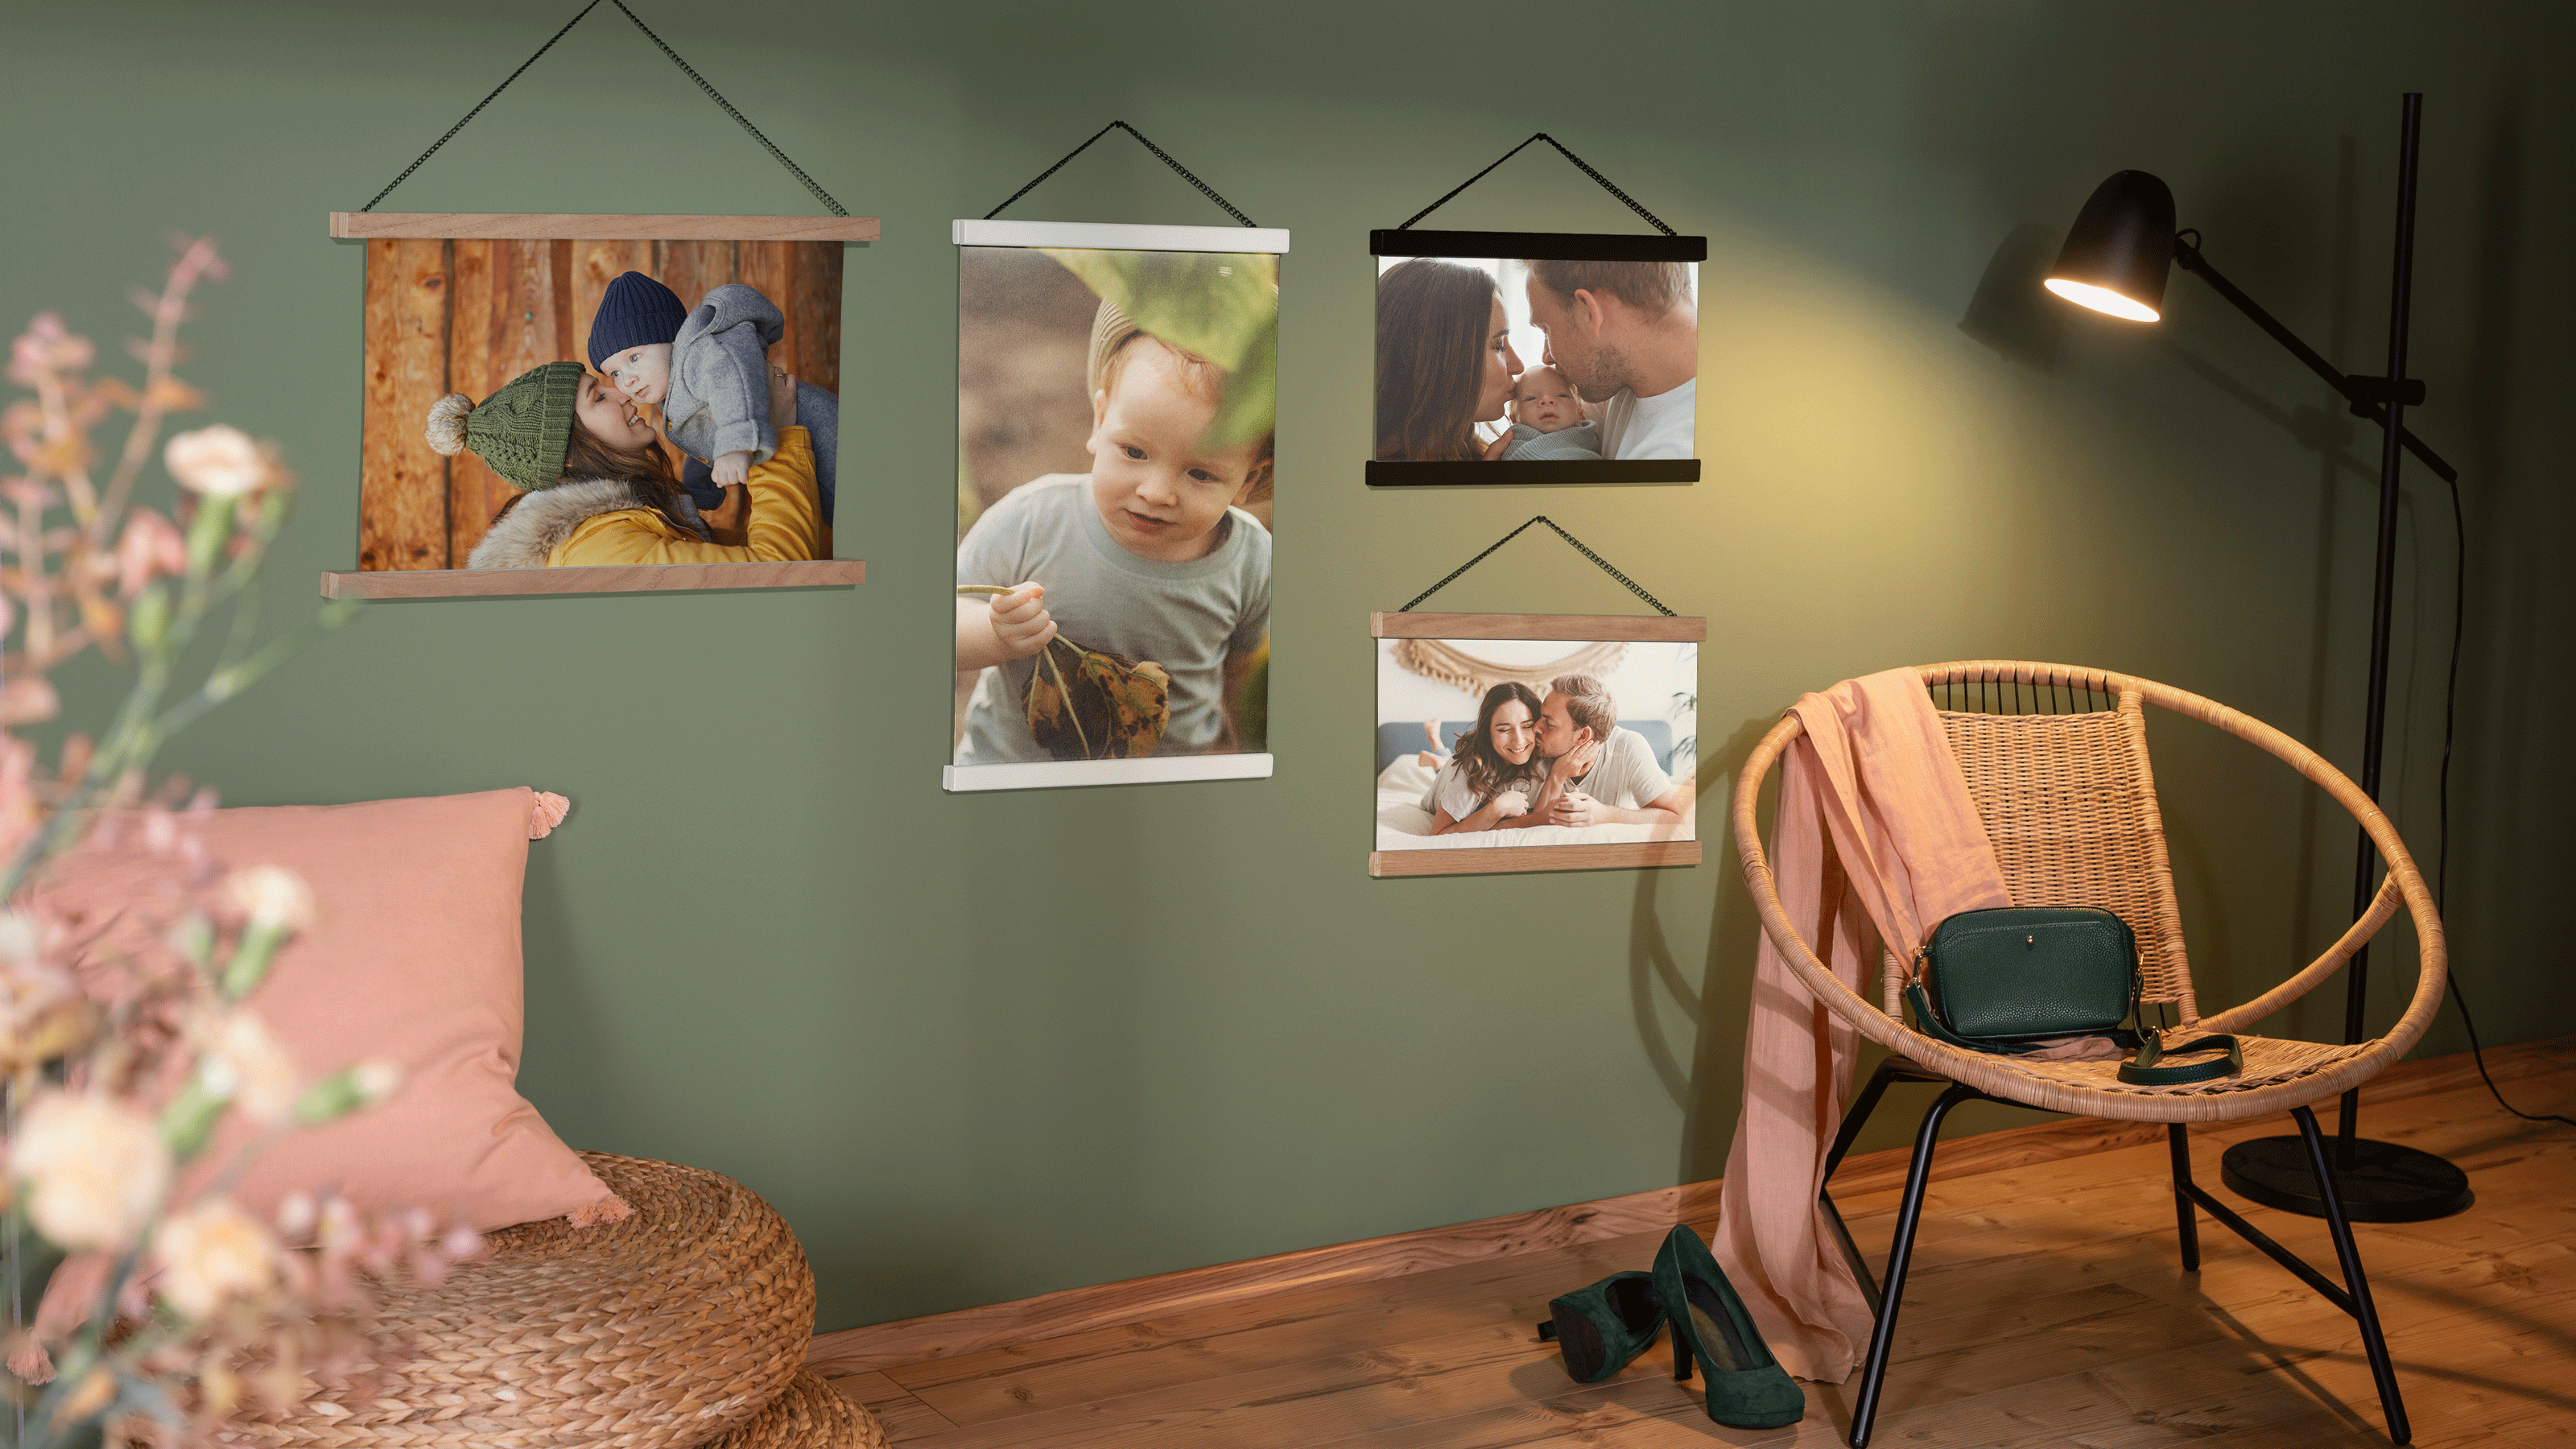 Encourage children's creativity with a display of photographs